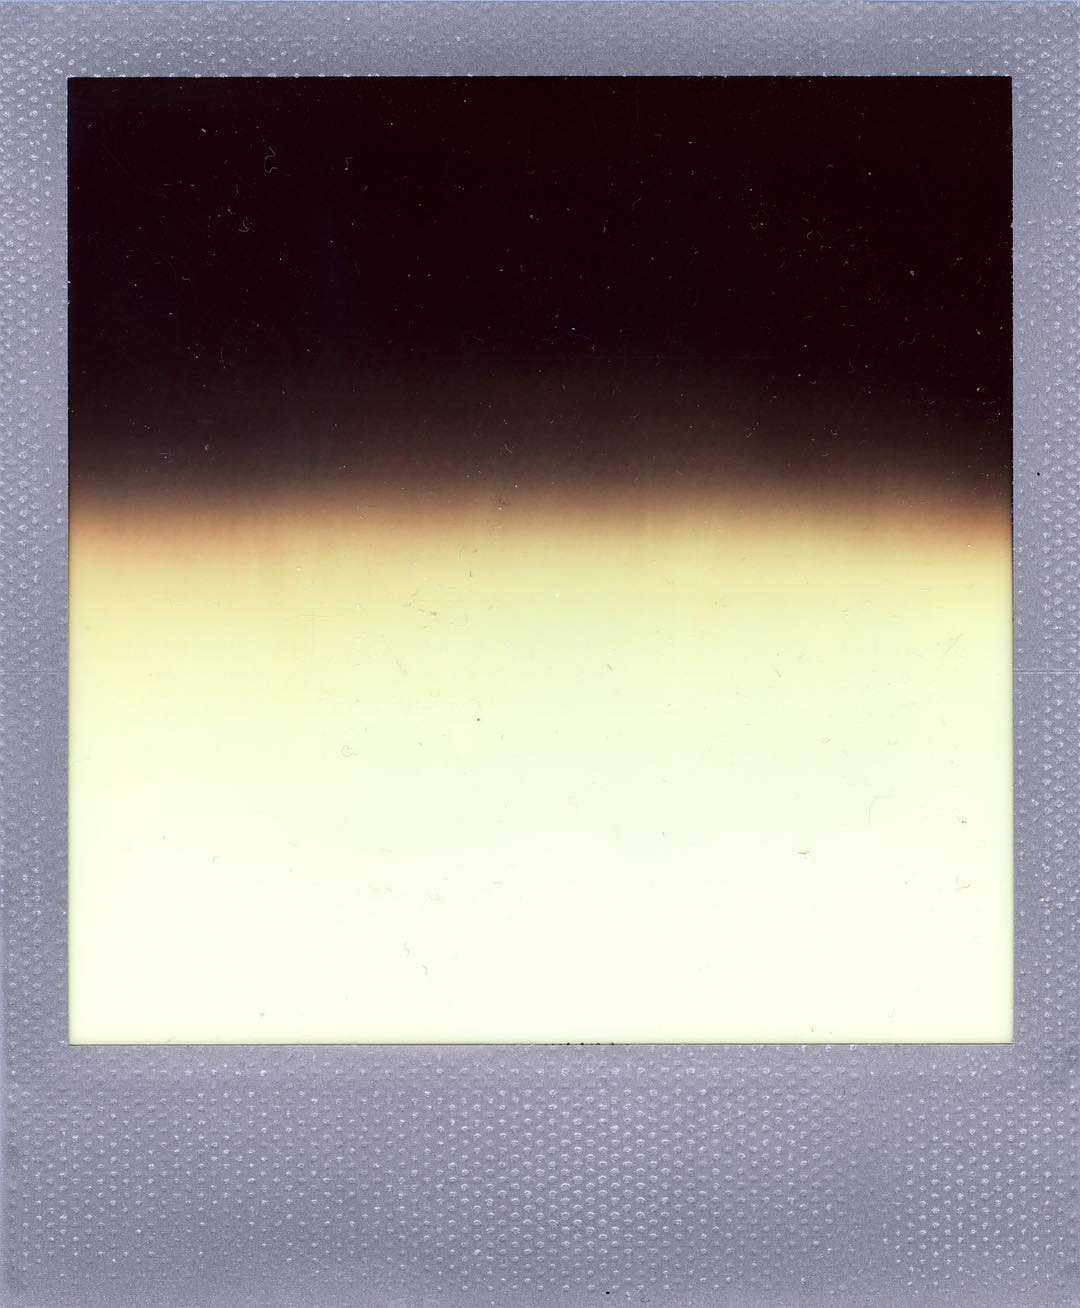 Approaching the sun in our spaceship #aprilfailsday #impossibleproject color film, ca.2015. #sx70